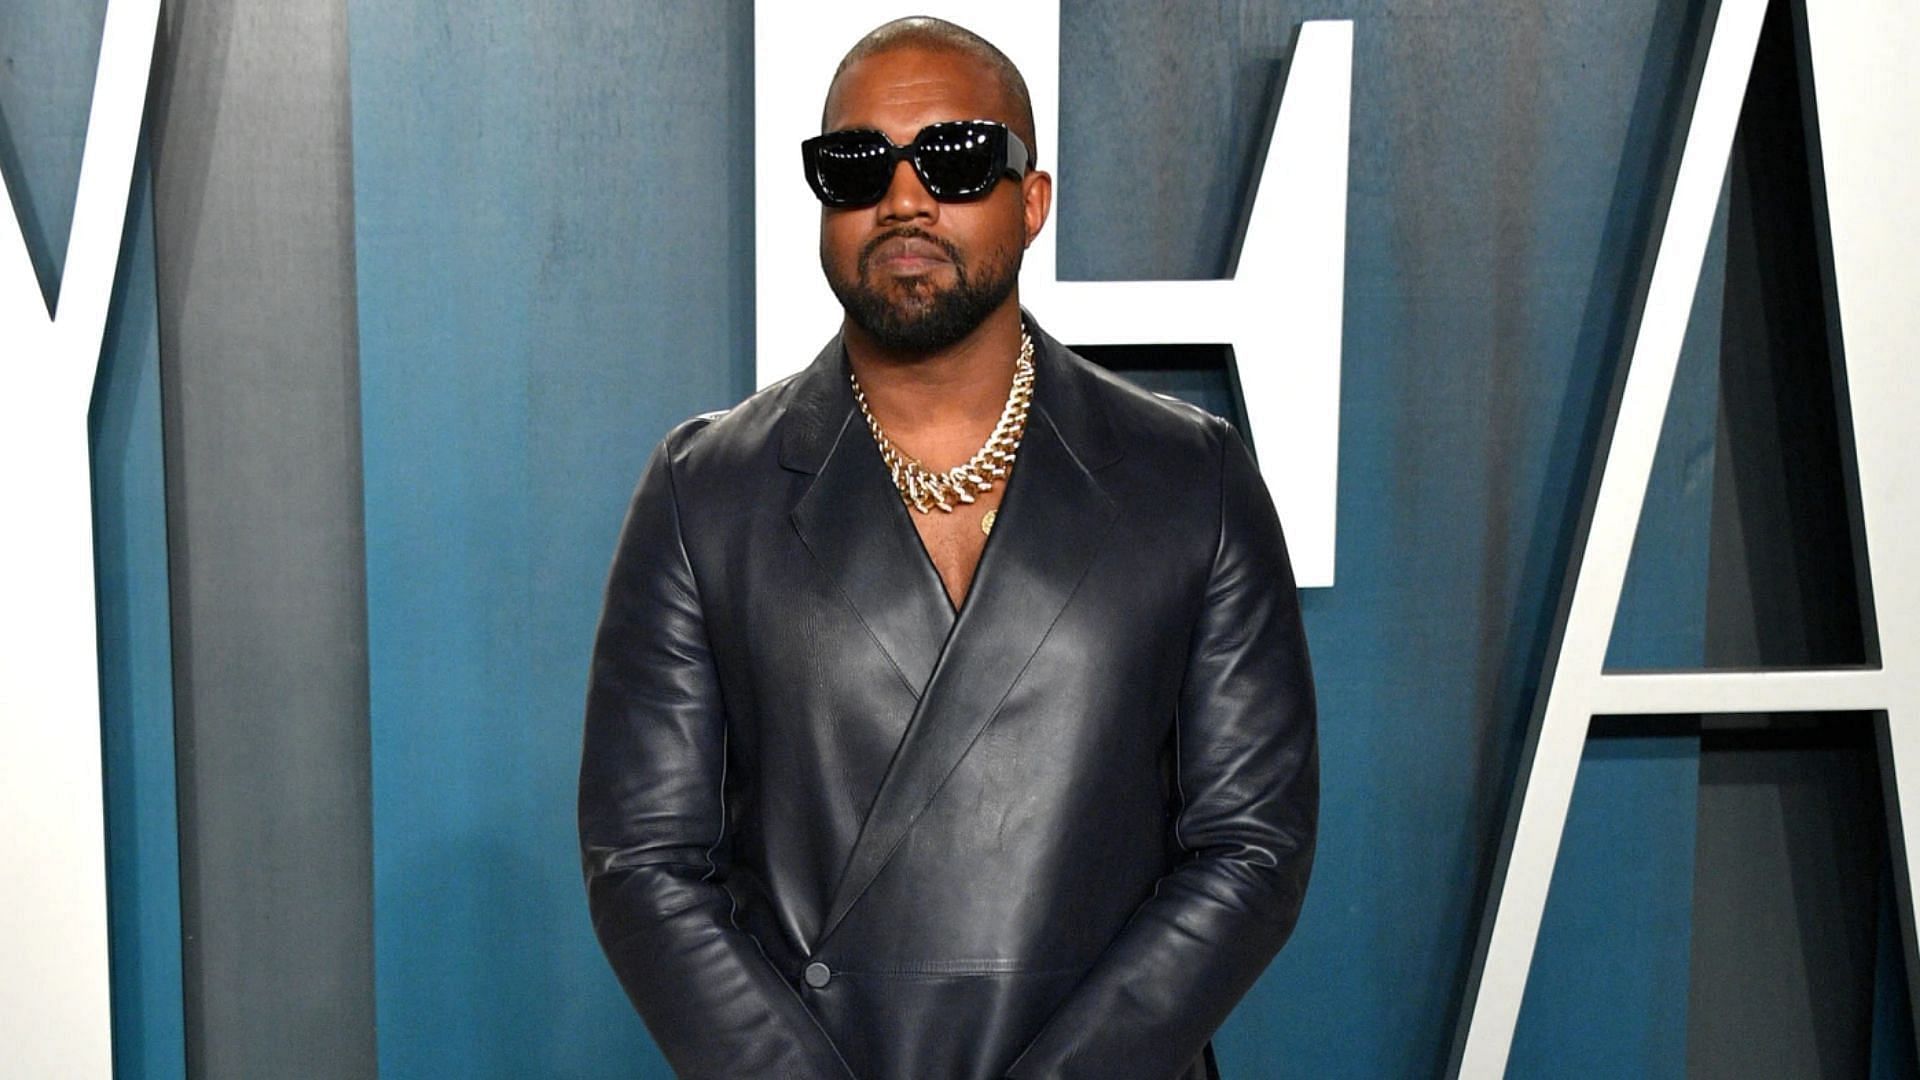 Kanye West throws shade at Gap for allegedly copying his brand, Yeezy (Image via Getty/George Pimentel)